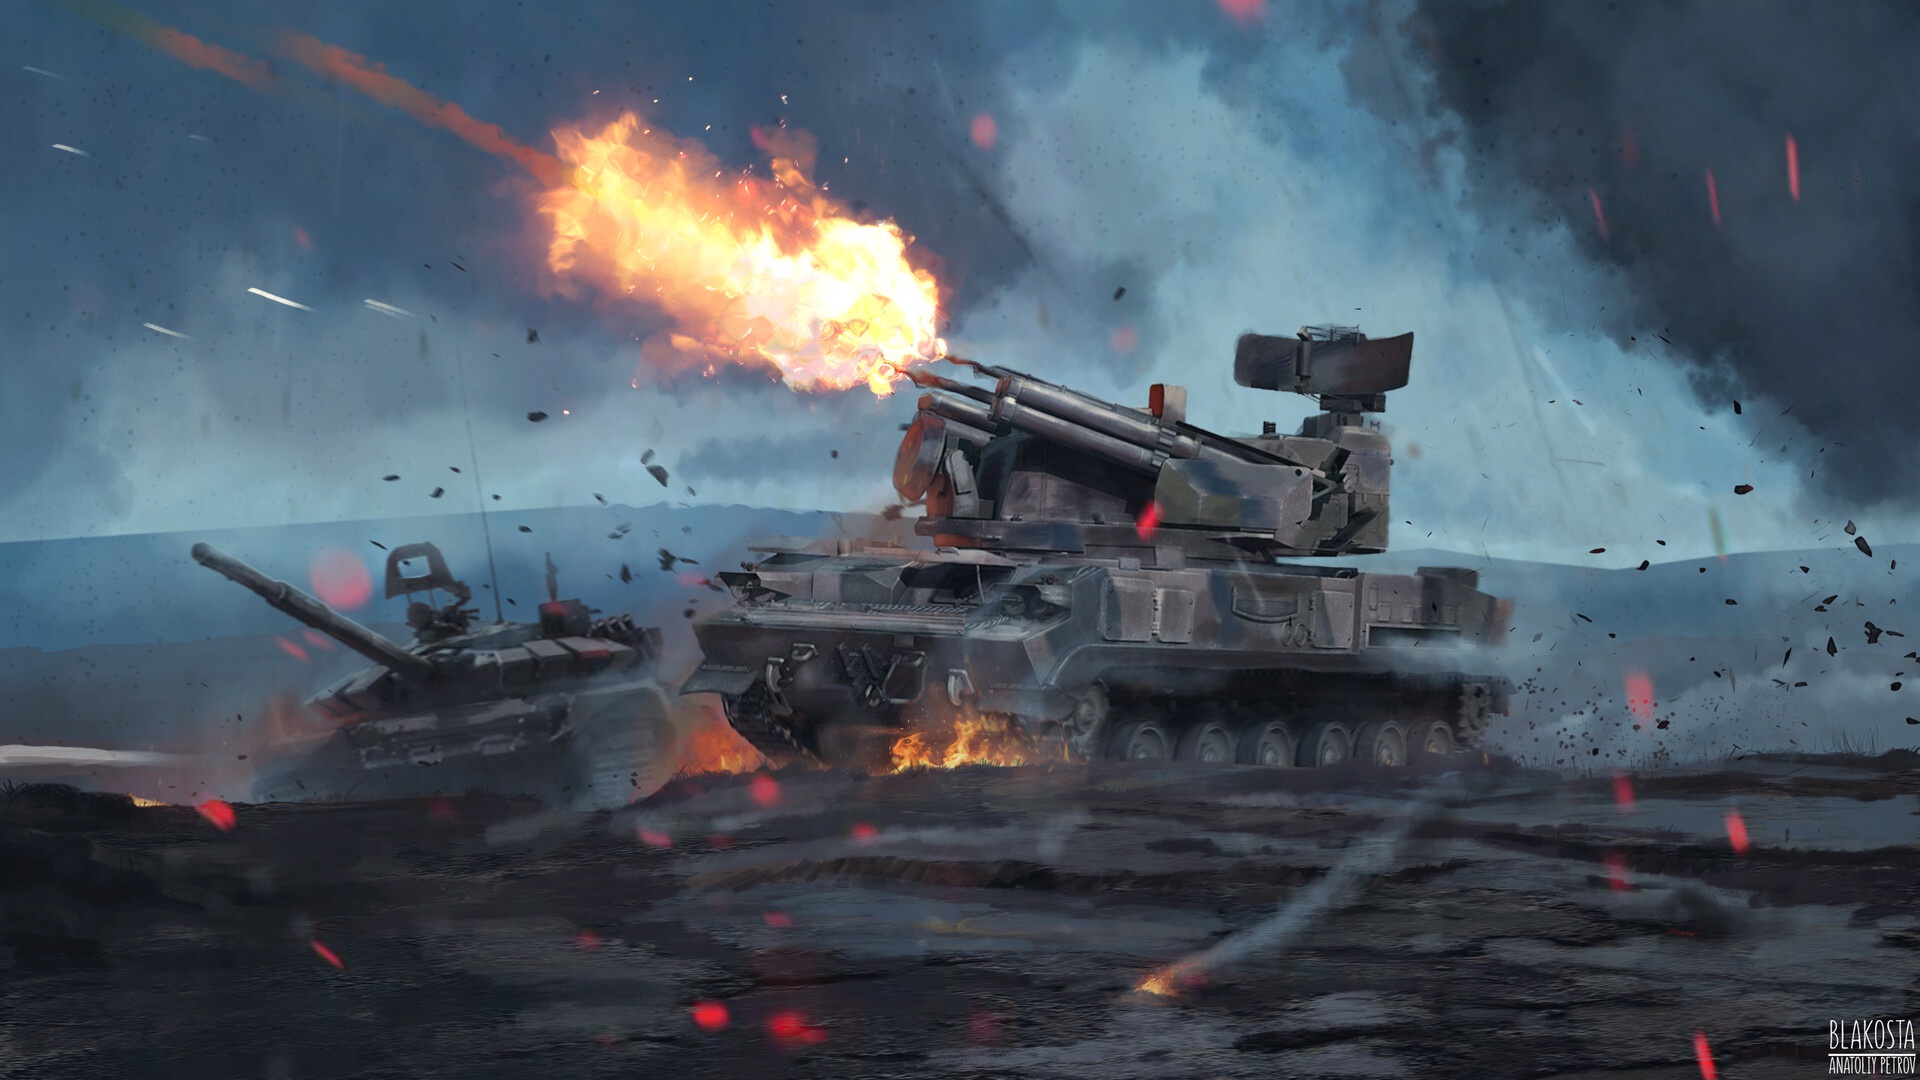 General 1920x1080 war battle military weapon artwork Air Defence System T-72 Russian/Soviet tanks